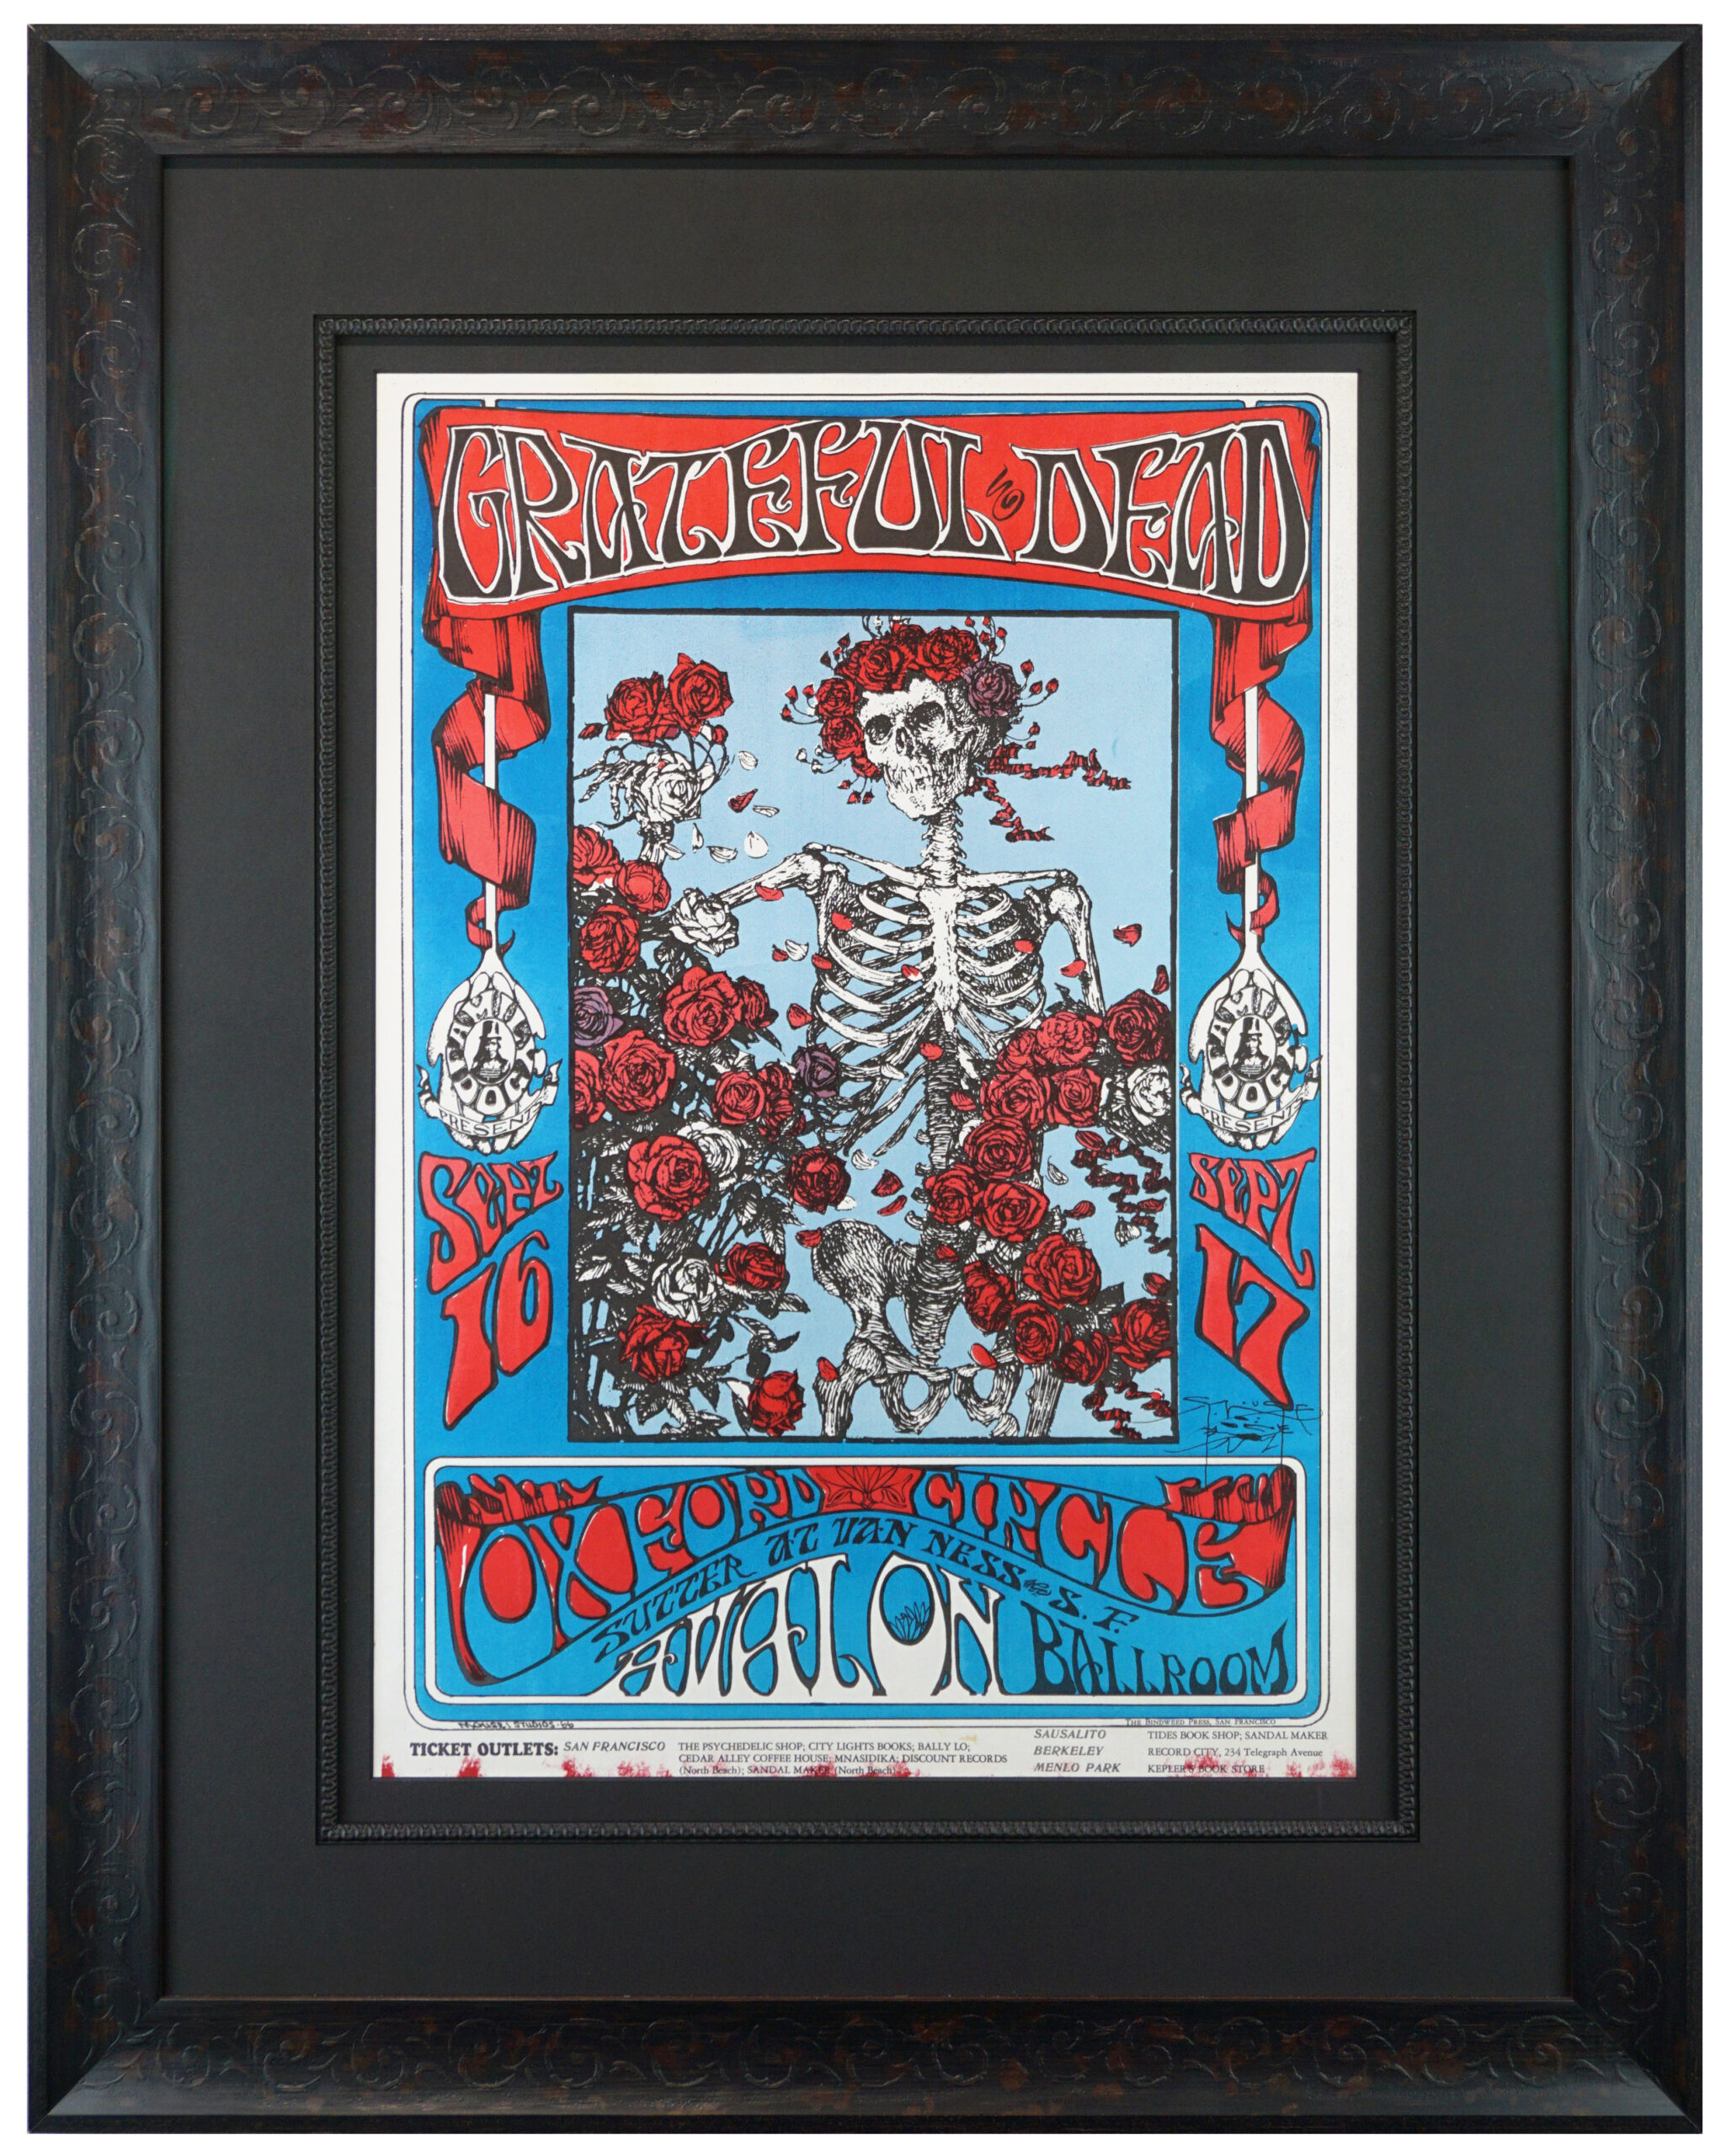 Grateful Dead: The Vintage Posters, 1966-1995 - Narrows Center for the Arts